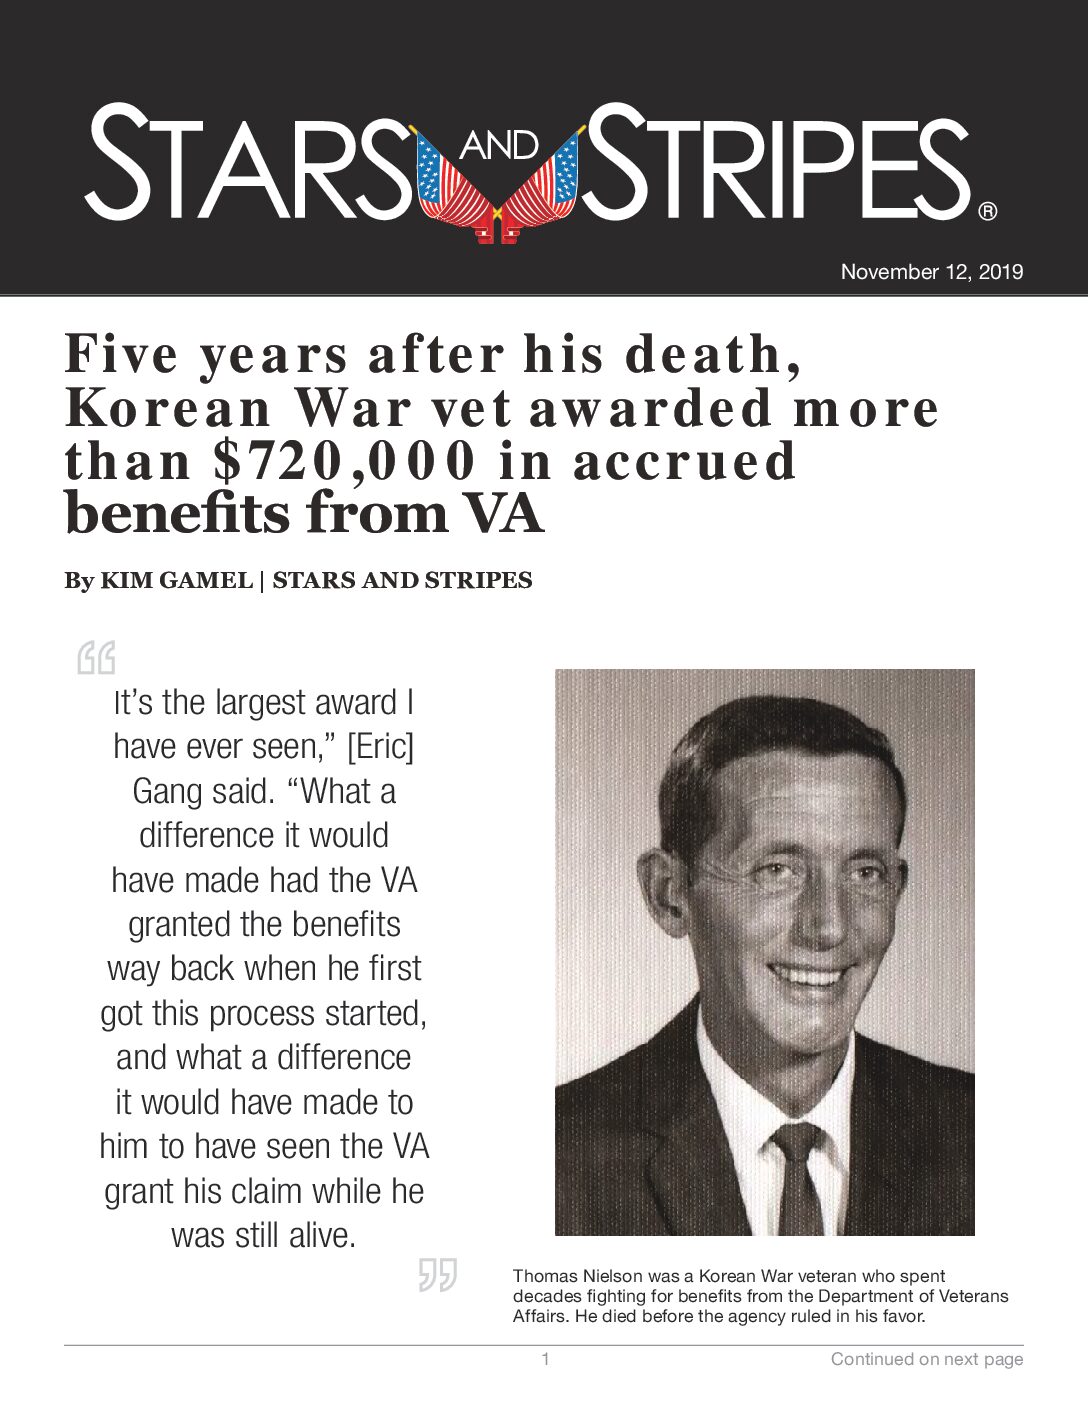 Five years after his death, Korean War vet awarded more than $720,000 in accrued benefits from VA